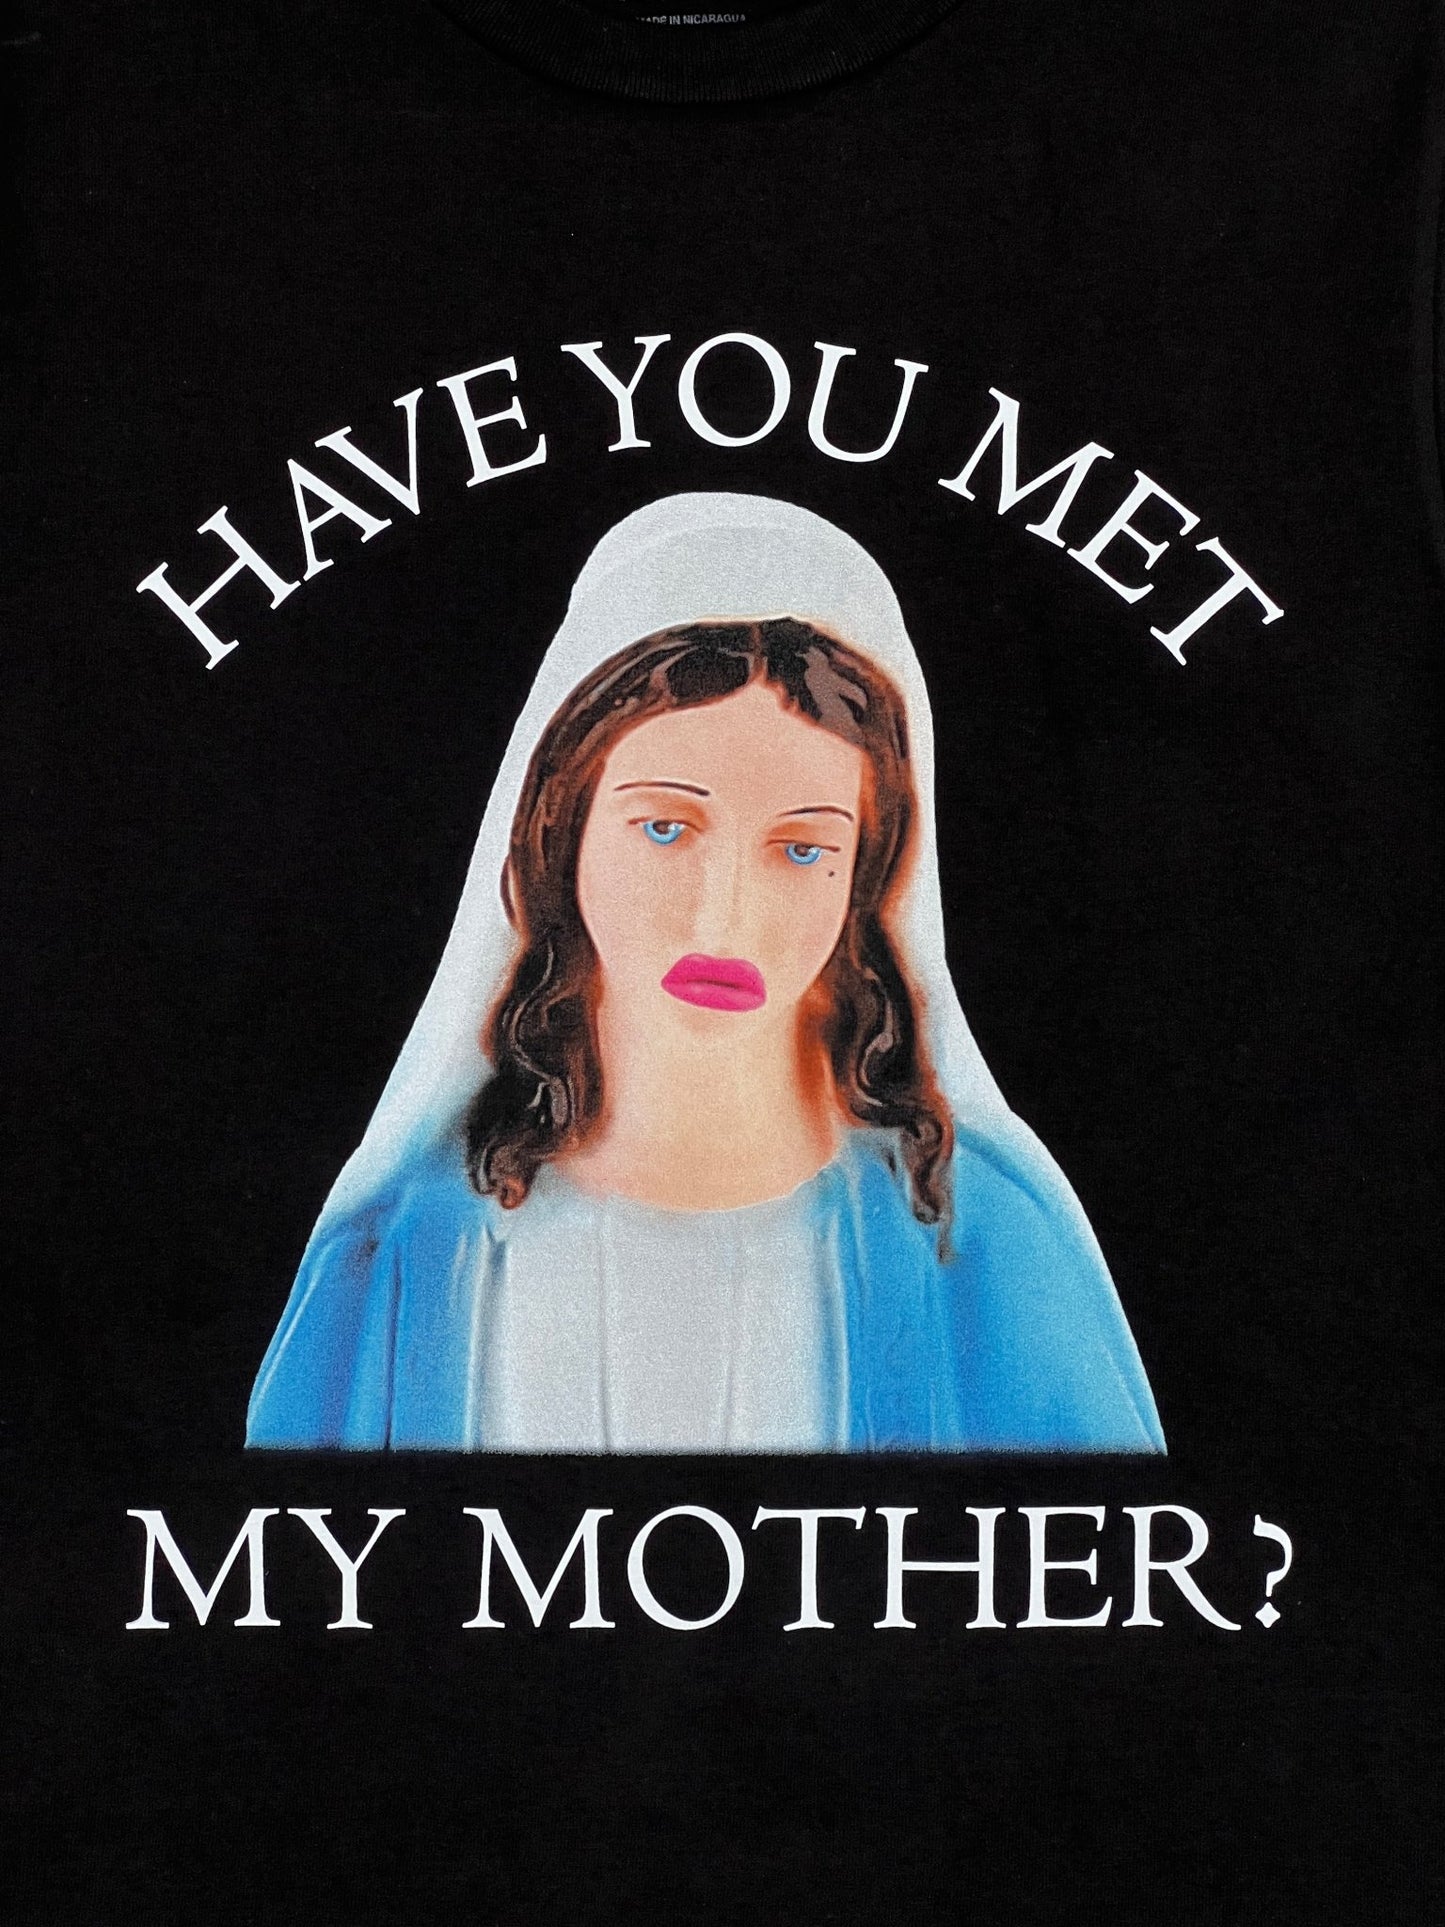 Have you met my PLEASURES MOTHER T-SHIRT BLACK, made of 100% Cotton?